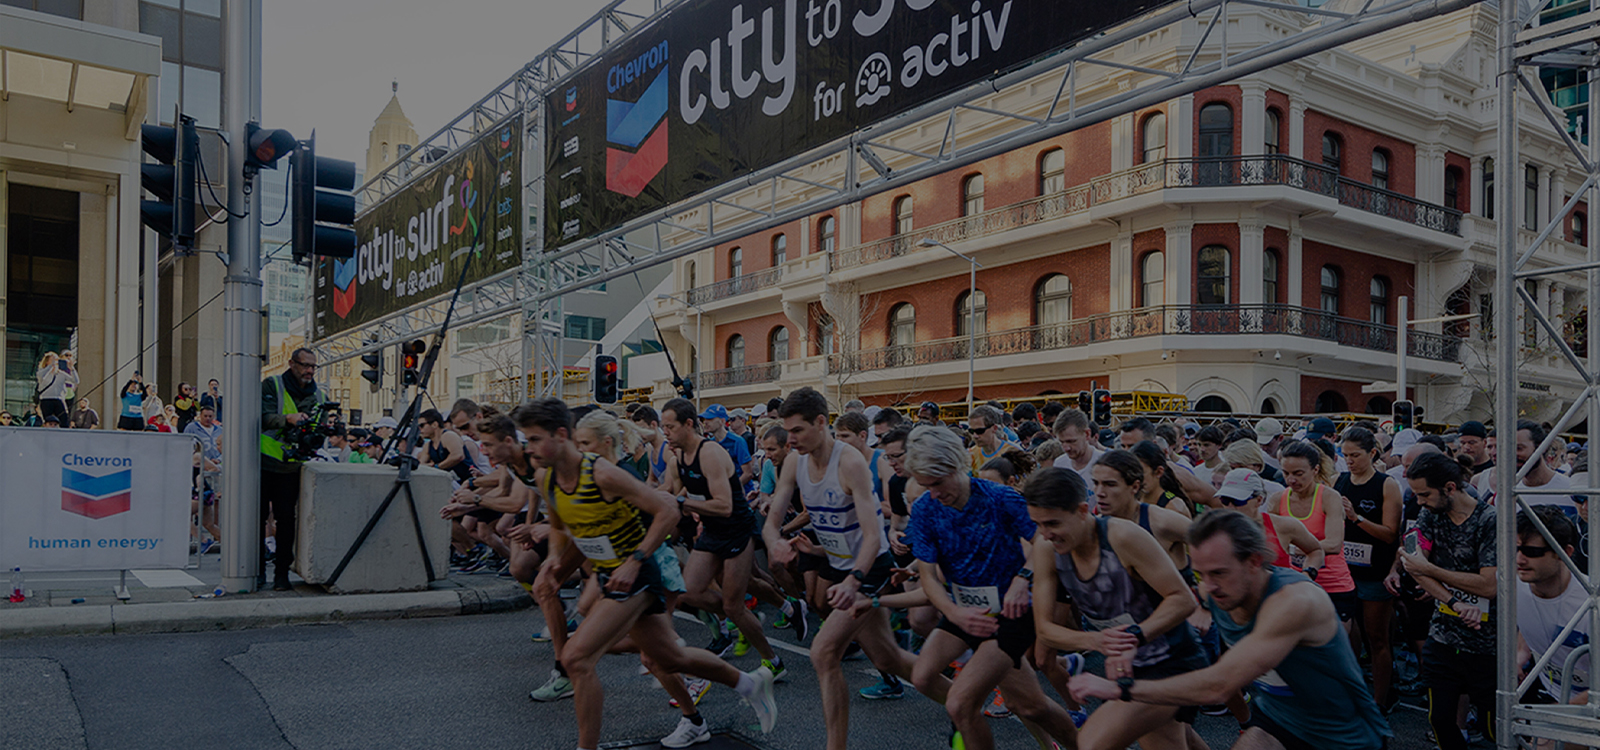 Chevron City To Surf For Activ